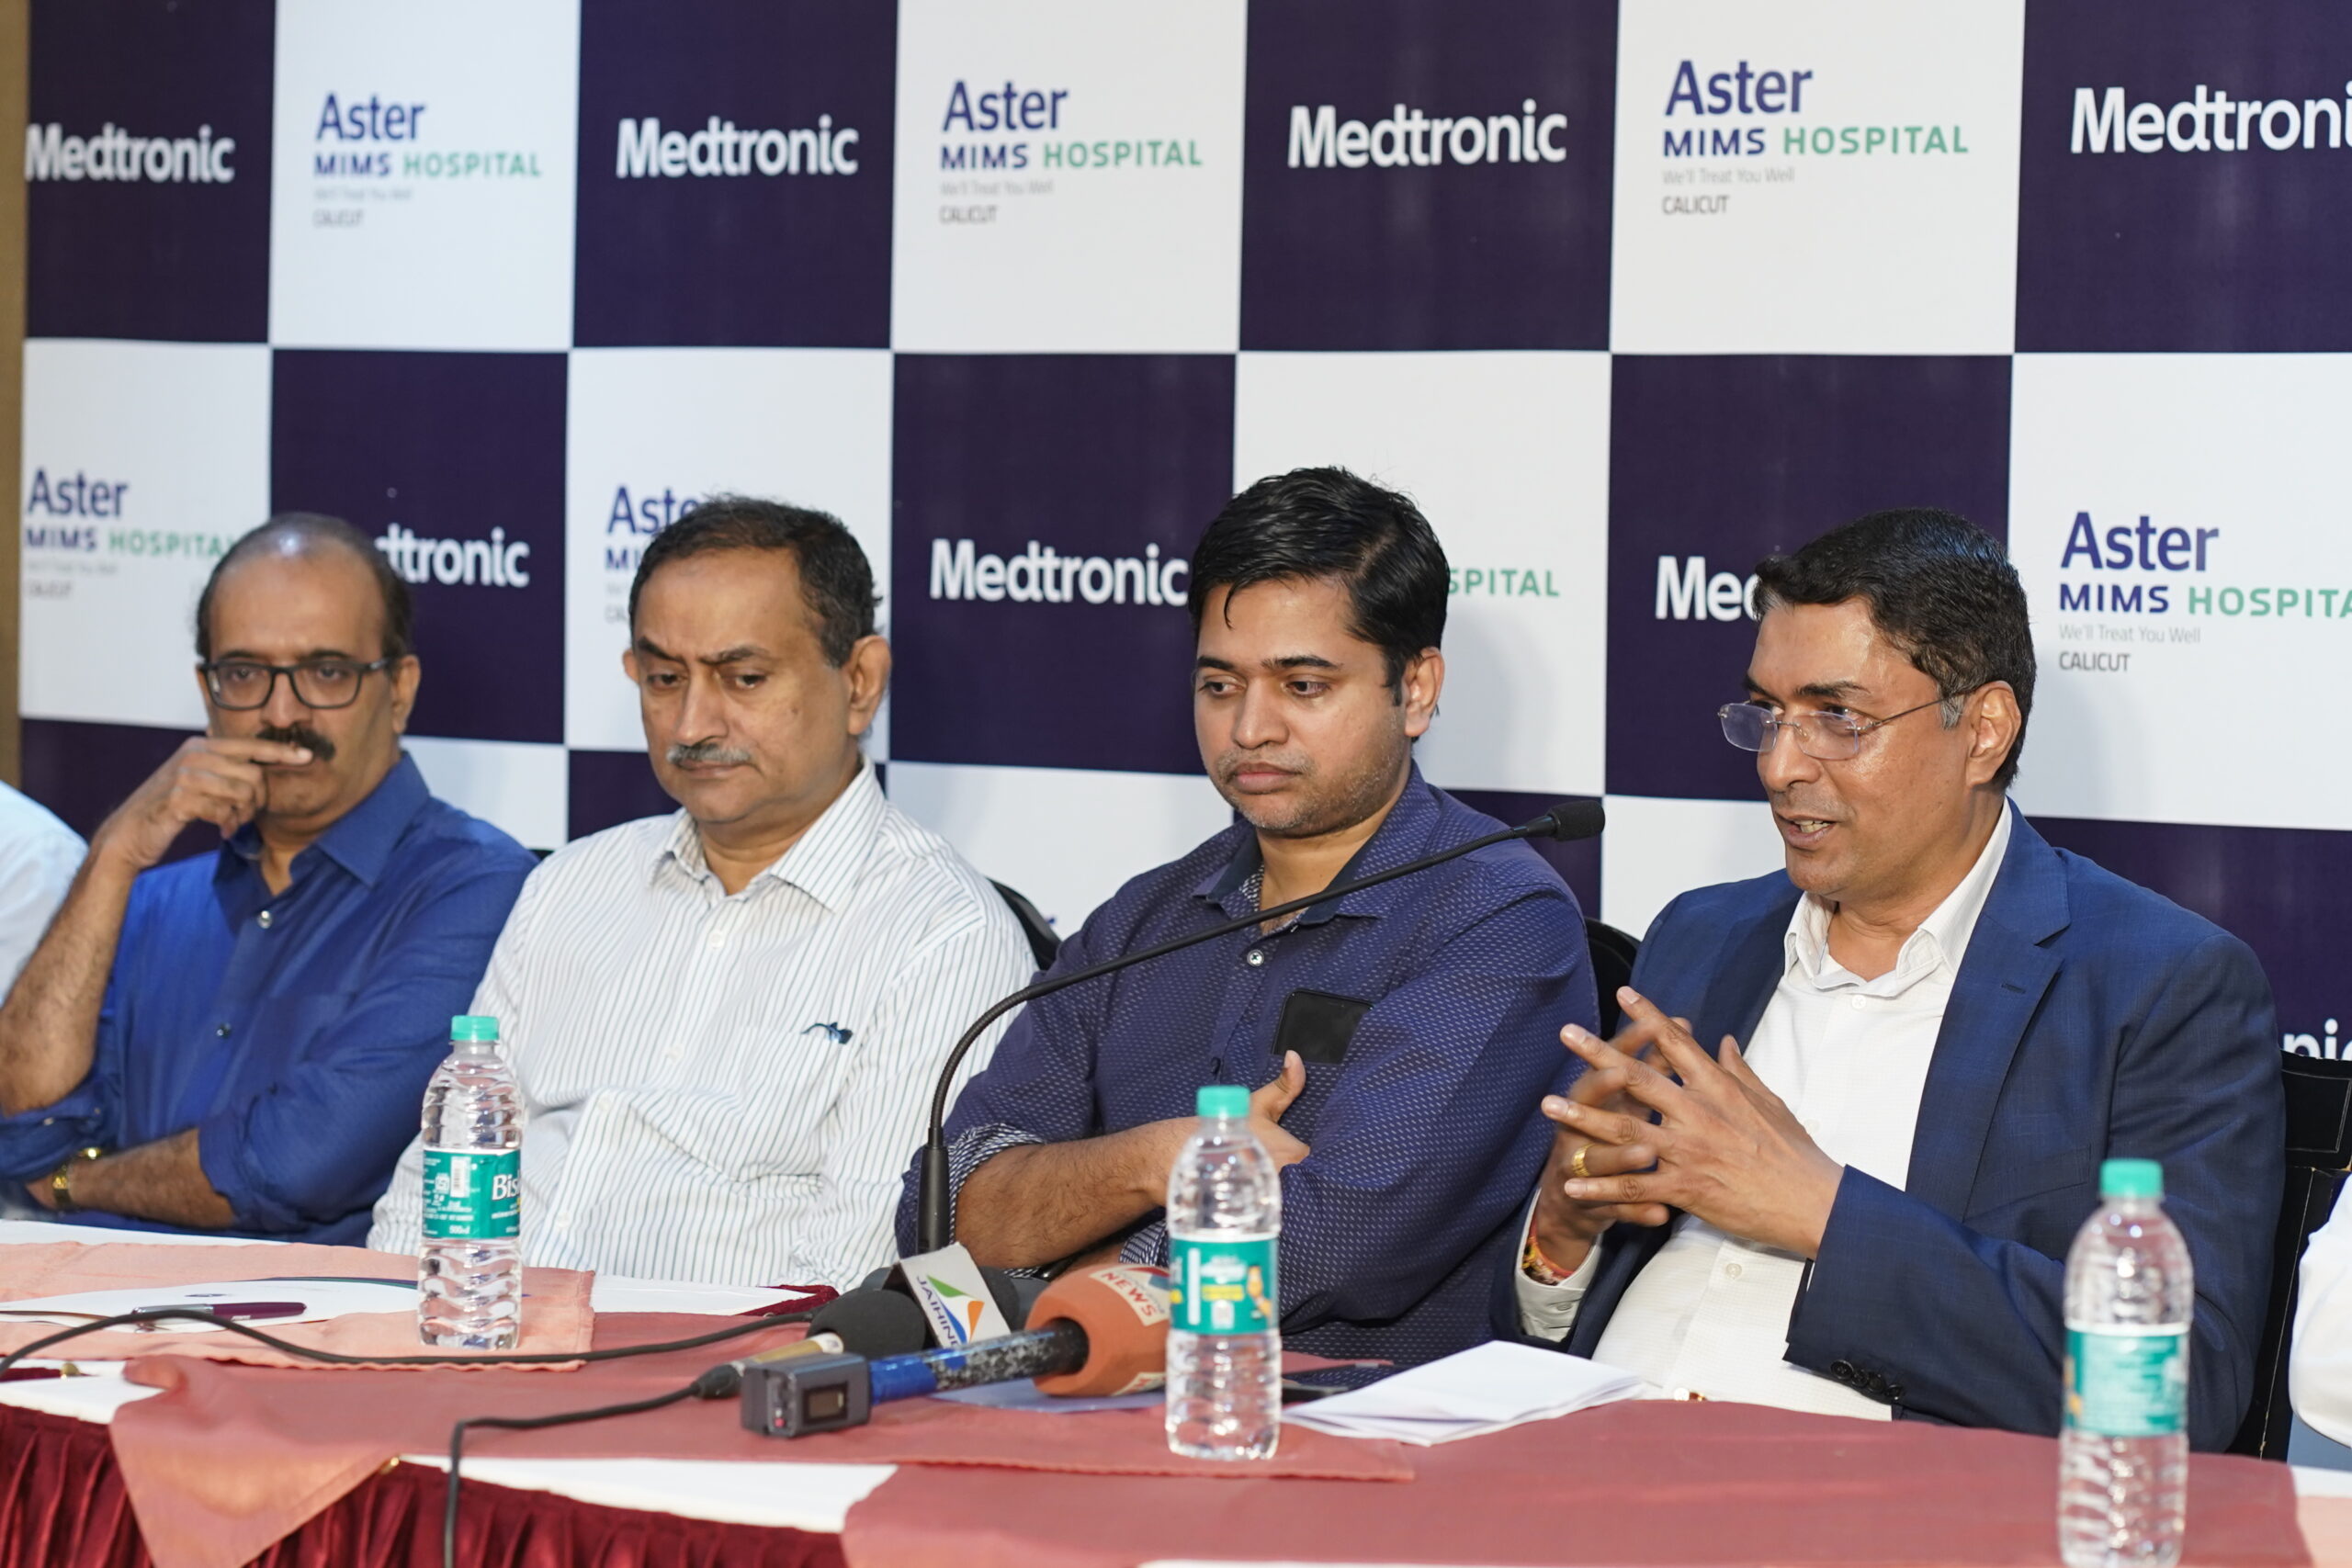 Aster MIMS collaborates with Medtronic to amplify access to stroke care for patients in Kerala